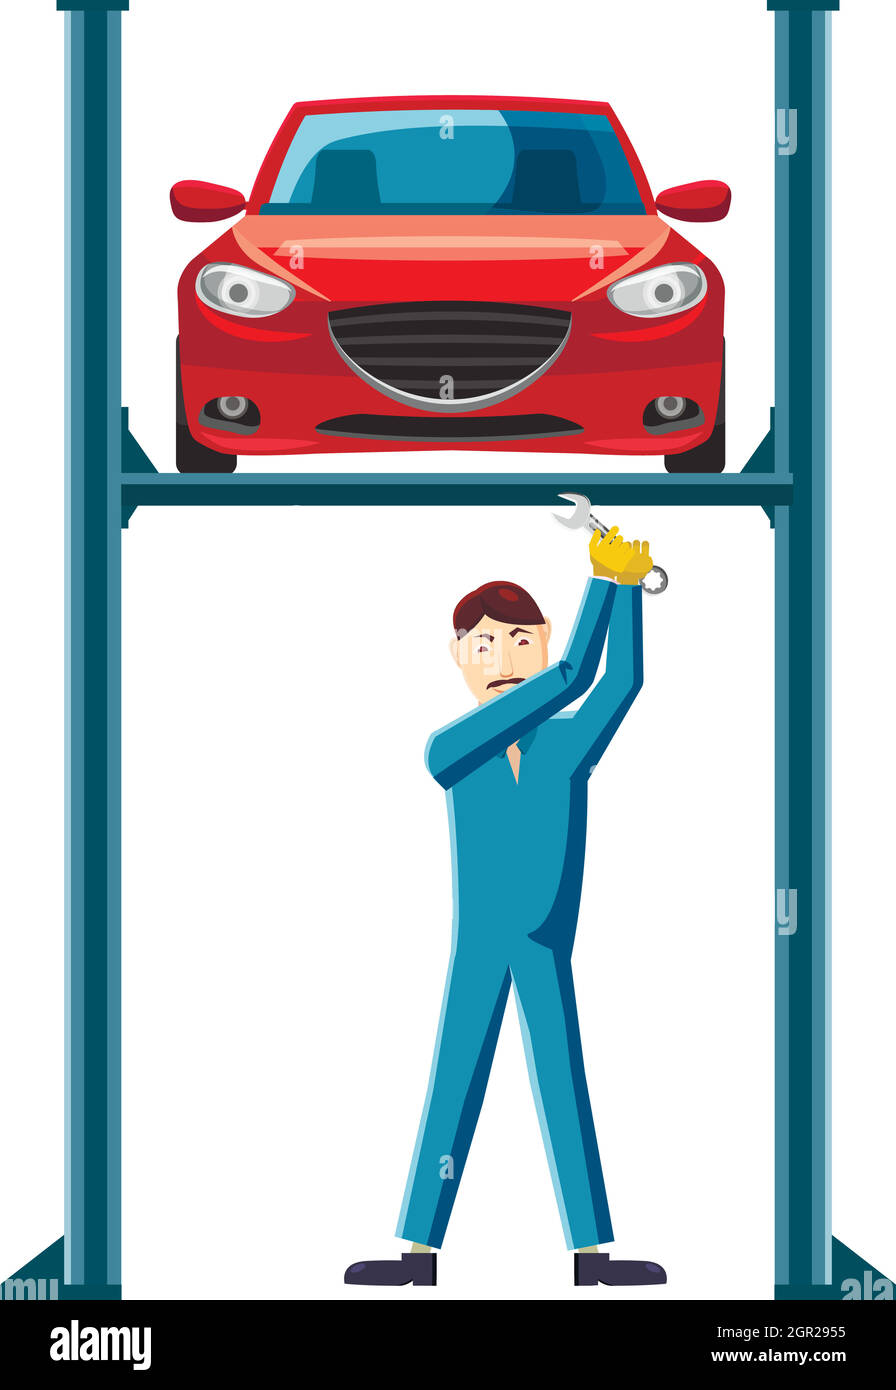 Mechanic repairing a car on a lift icon Stock Vector